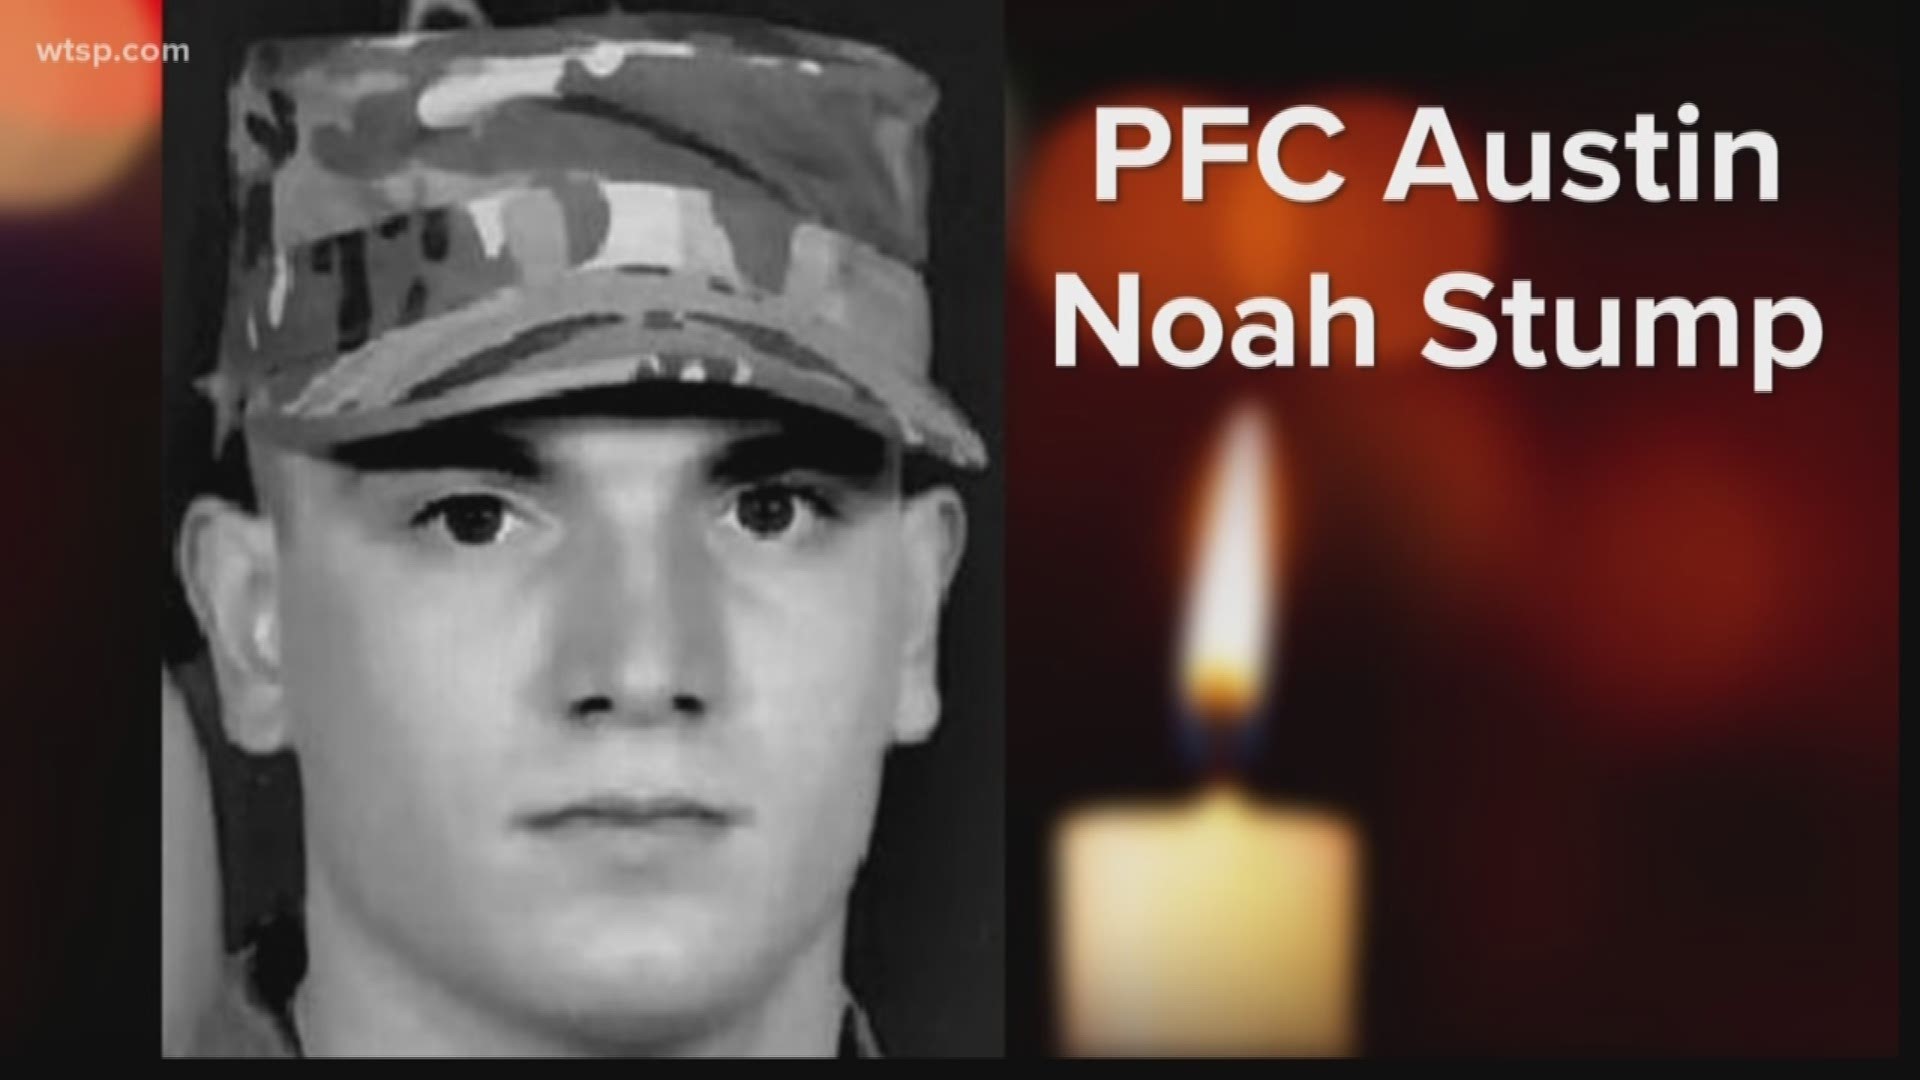 The body of PFC Austin Noah Stump '17 arrived back home Thursday. He was accompanied by a U.S. Army Honor Guard detail. https://on.wtsp.com/2m3tvWu